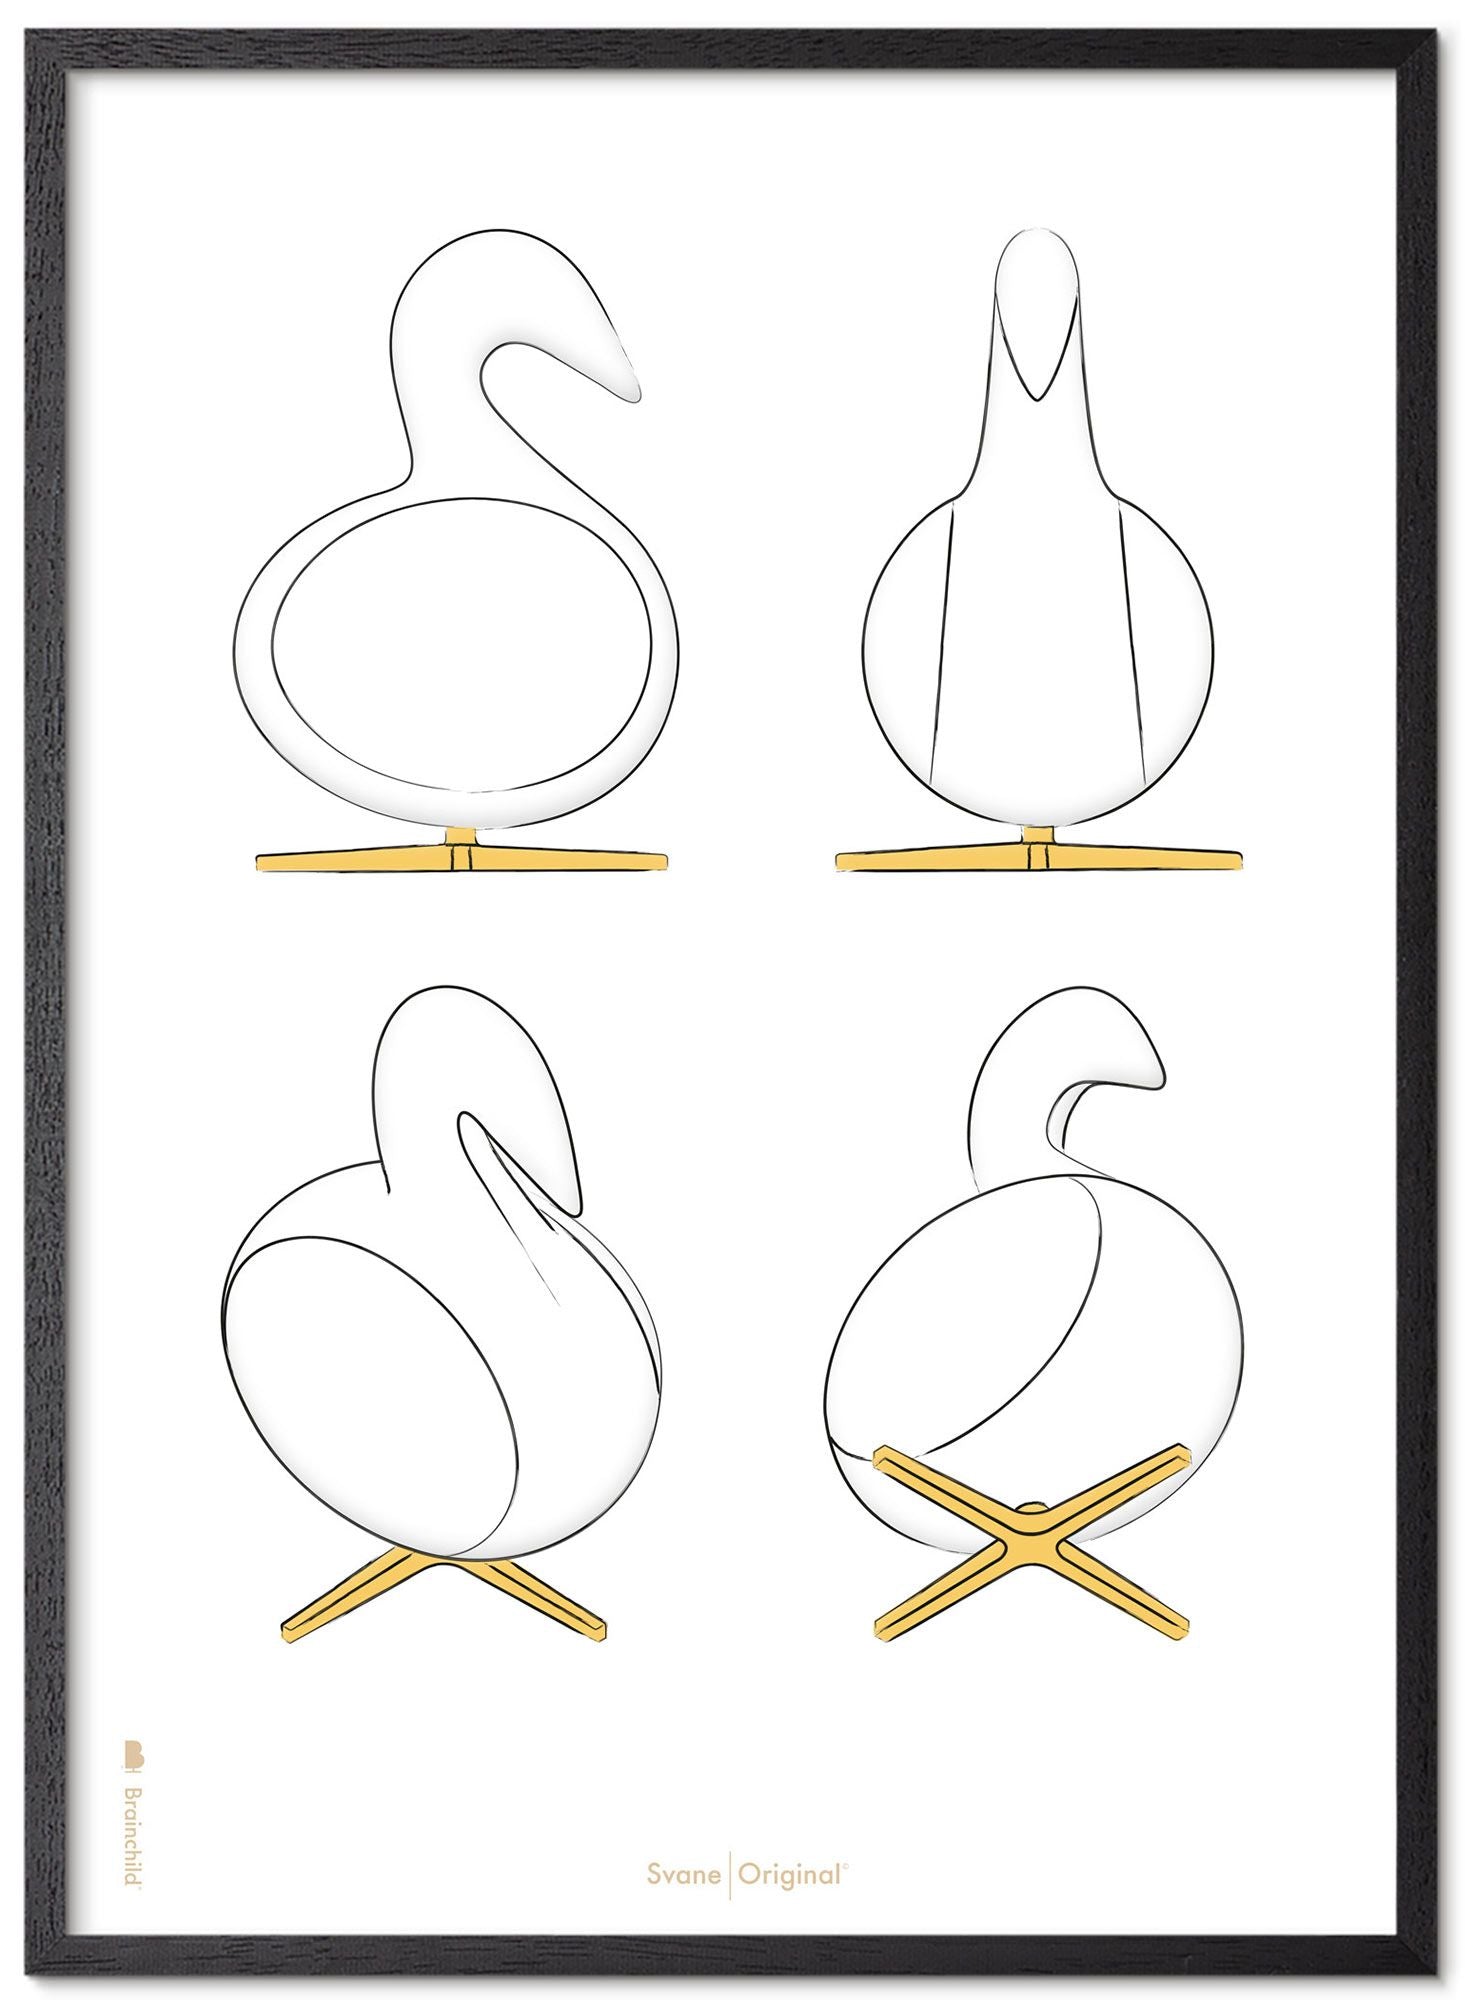 Brainchild Swan Design Sketches Poster Frame Made Of Black Lacquered Wood 30x40 Cm, White Background